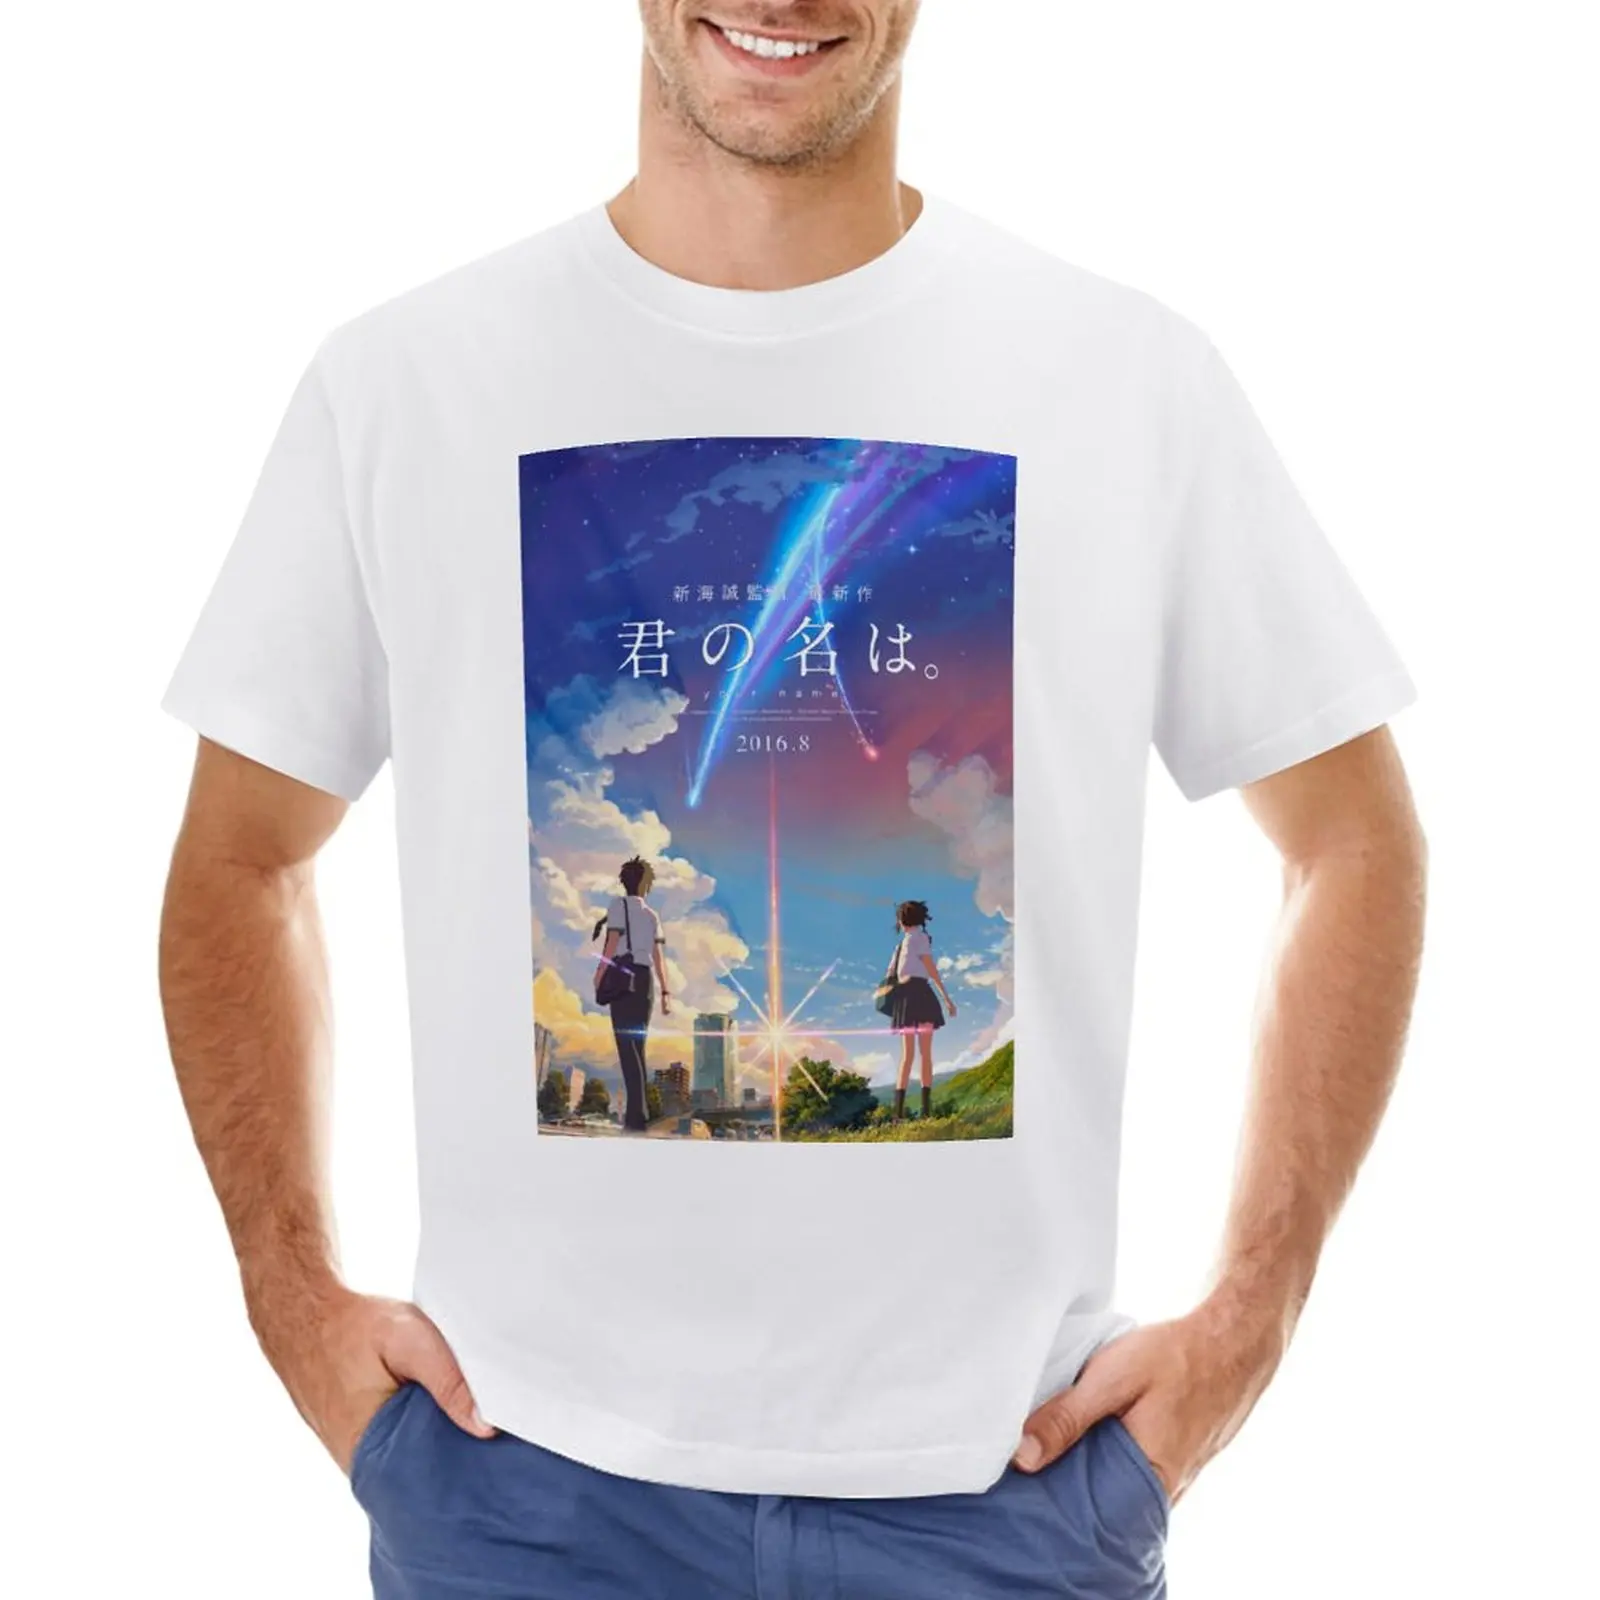 

kimi no na wa // your name anime movie poster BEST RES T-Shirt vintage Blouse blacks mens graphic t-shirts big and tall